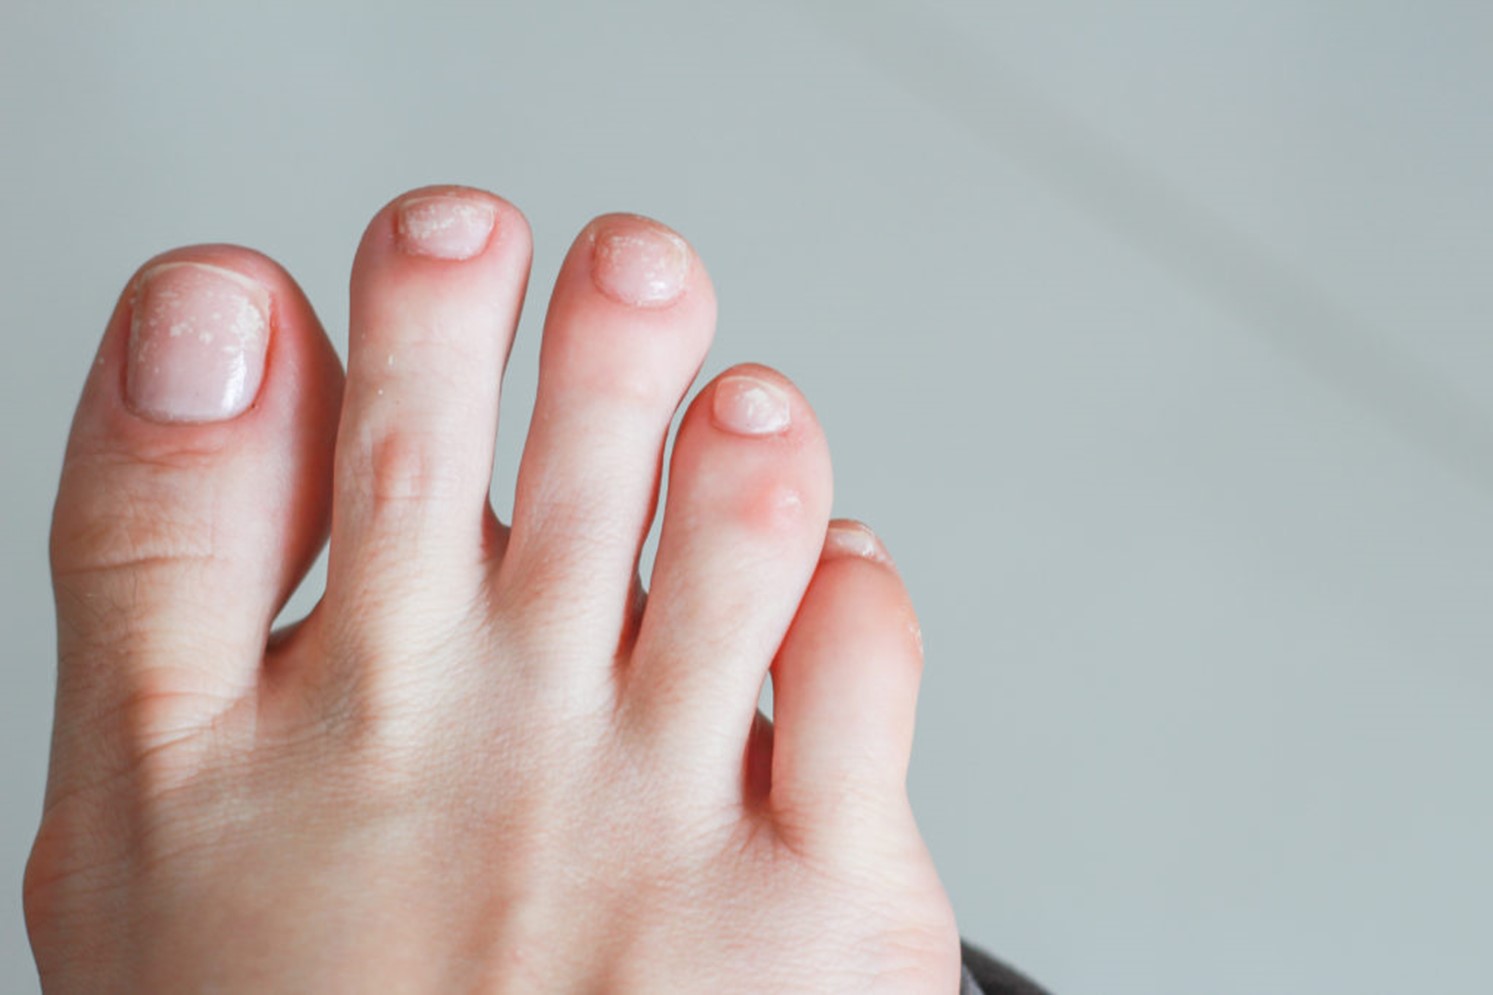 It's Not A Lack Of Calcium That Causes White Spots On Your Toenails